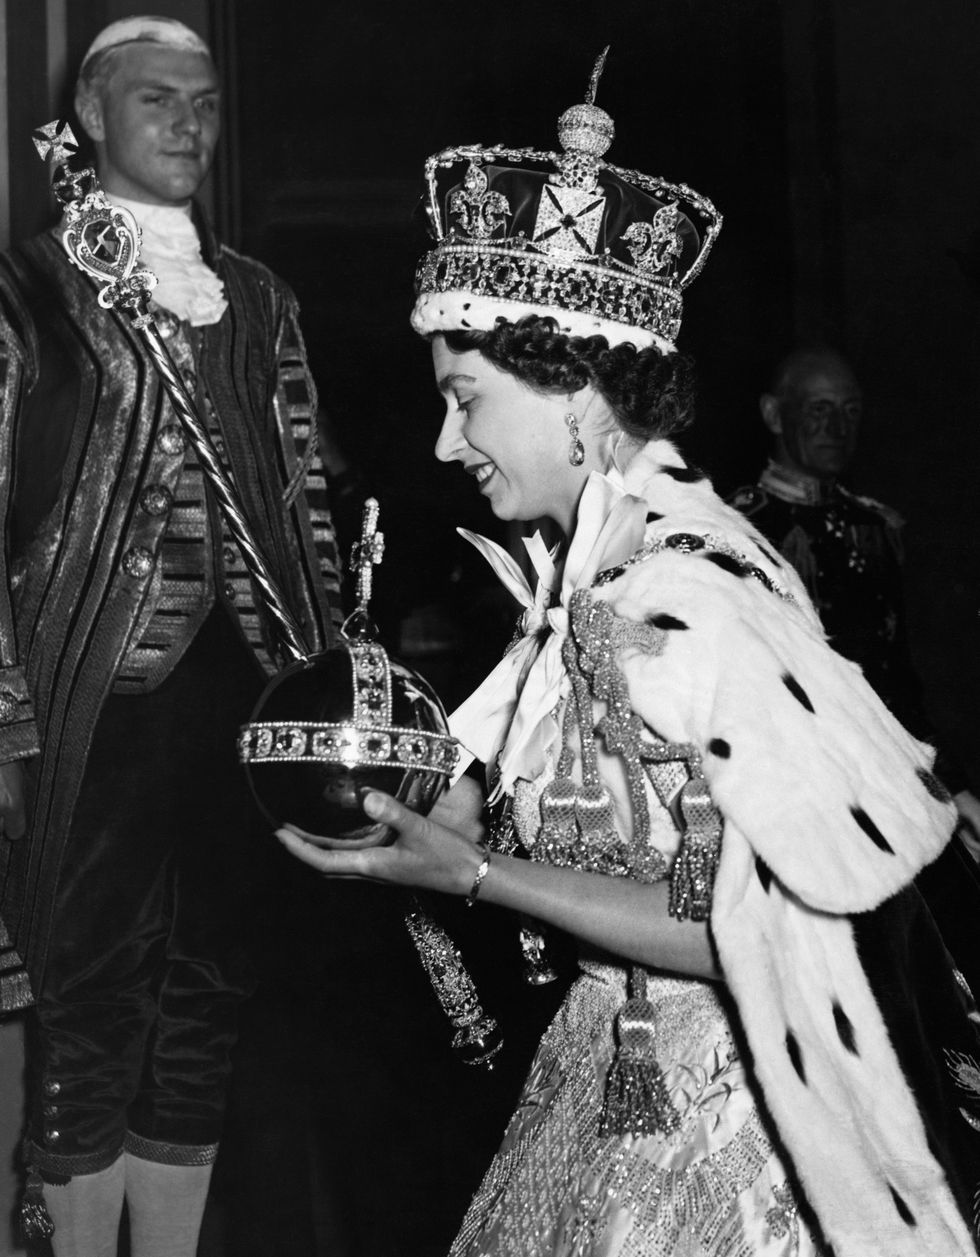 queen elizabeth ii, wearing the imperial state crown and carrying the orb, arrives at buckingham palace from westminster abbey, after her coronation in 1953 photo by © hulton deutsch collectioncorbiscorbis via getty images